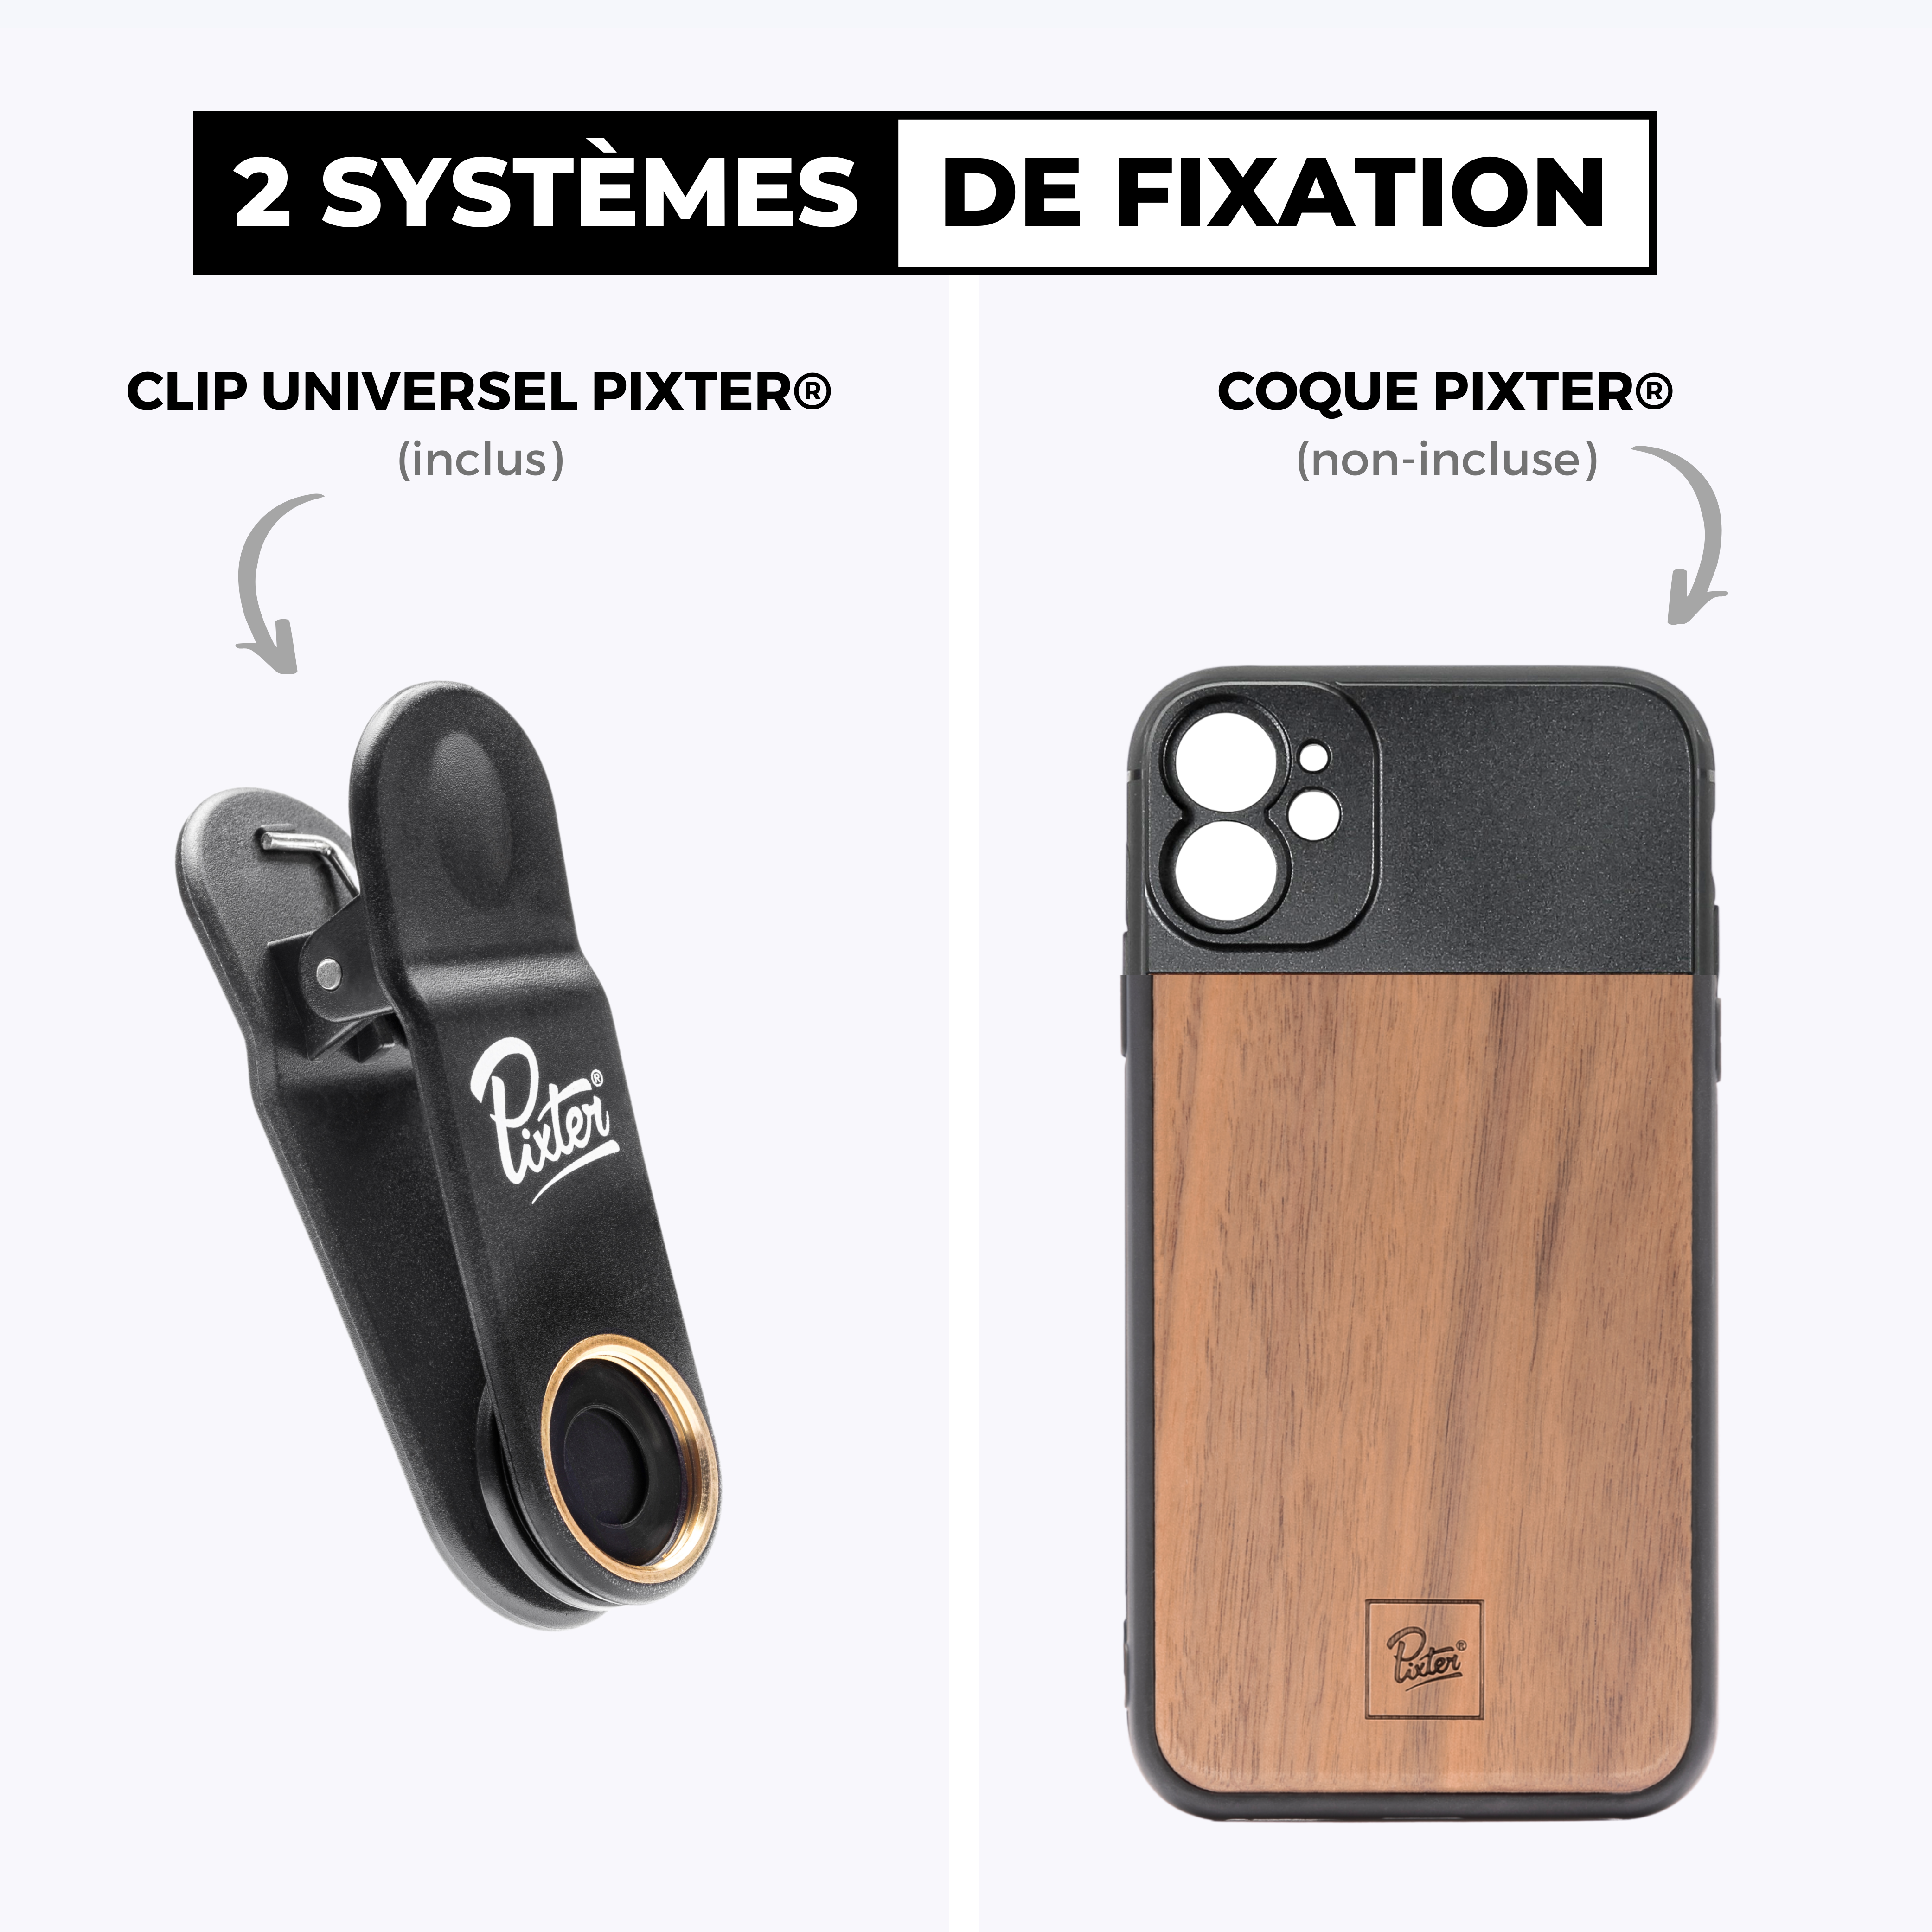 Objectif Pince 2 en 1 pour IPHONE 11 Smartphone Super Grand Angle